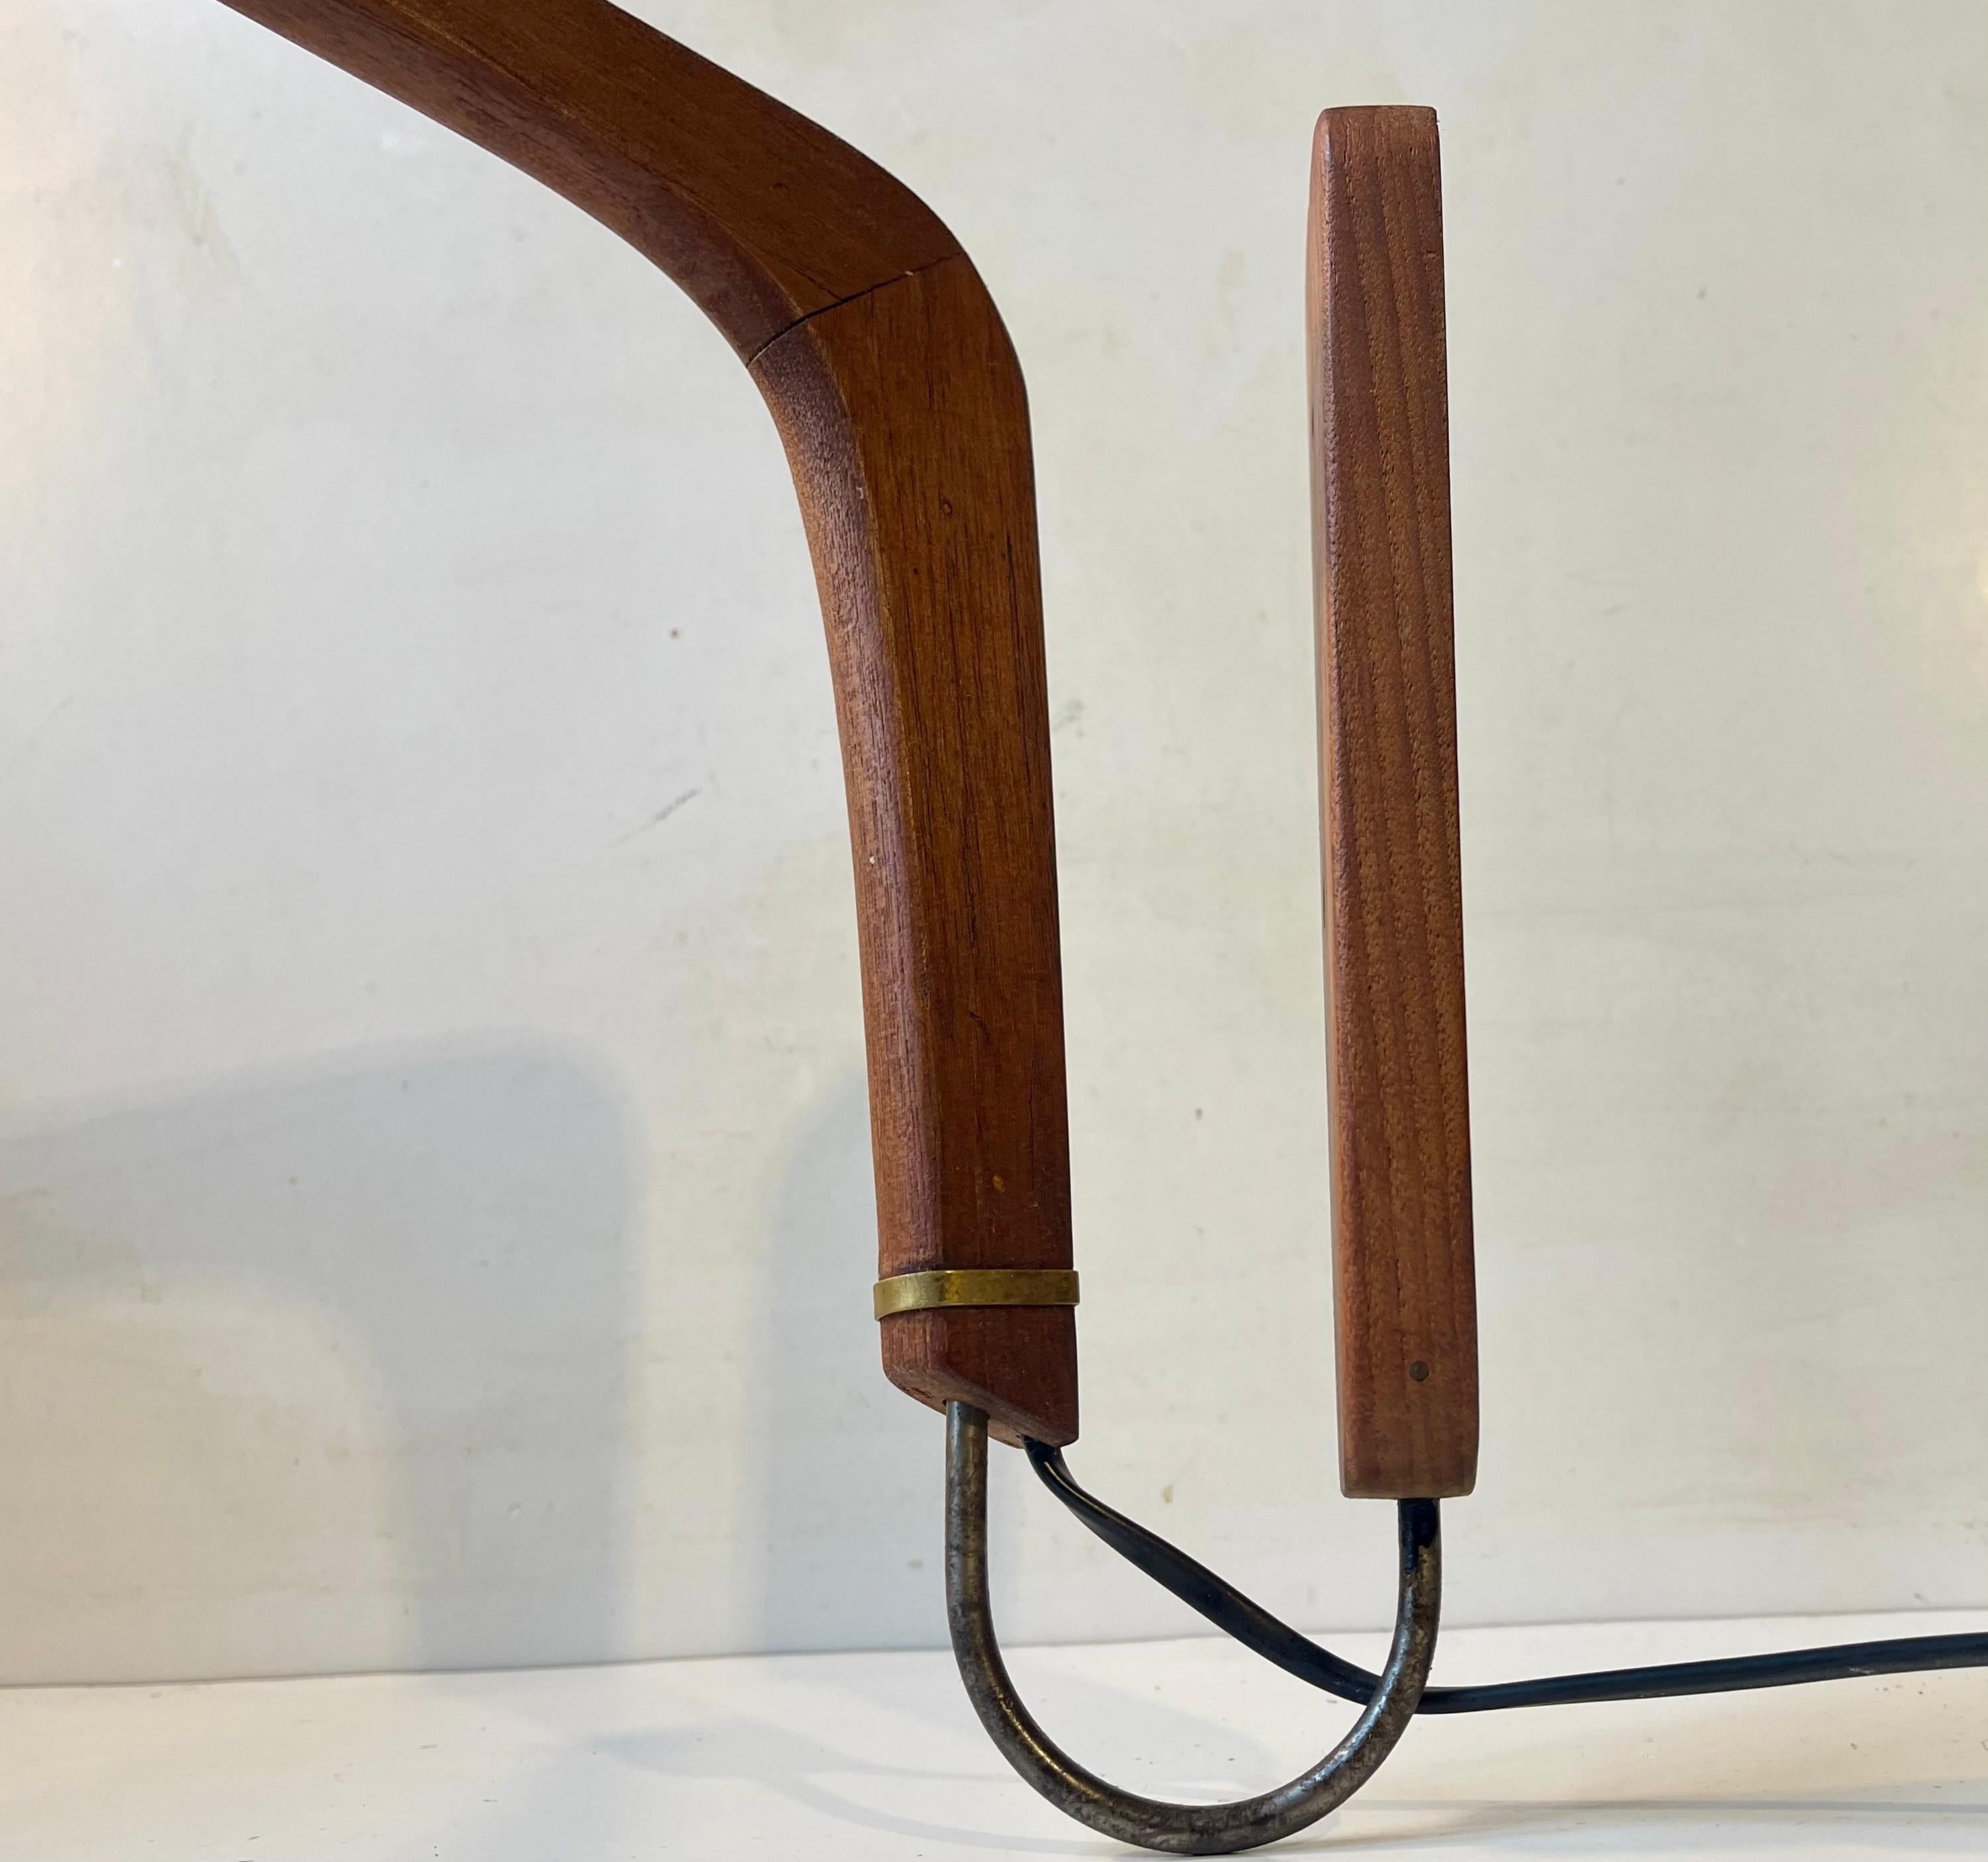 Mid-20th Century Svend Aage Holm Sørensen Large Articulated Wall Lamp in Teak and Brass, 1950s For Sale